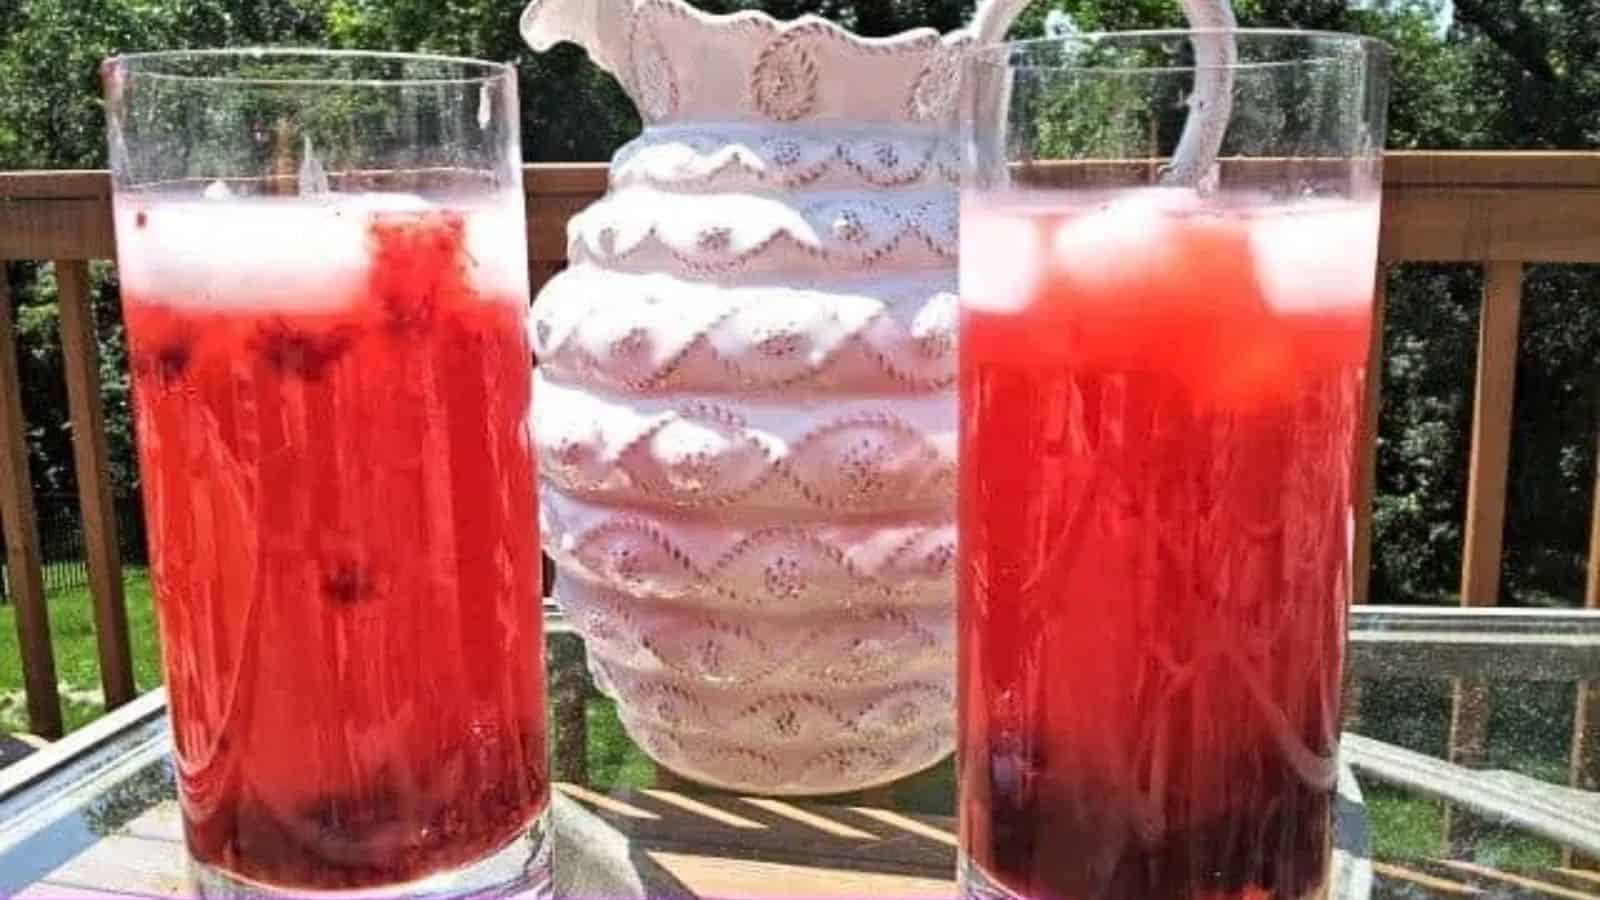 Image shows two glasses of Berry Lemonade with ice and berries at the bottom with a white pitcher behind it.